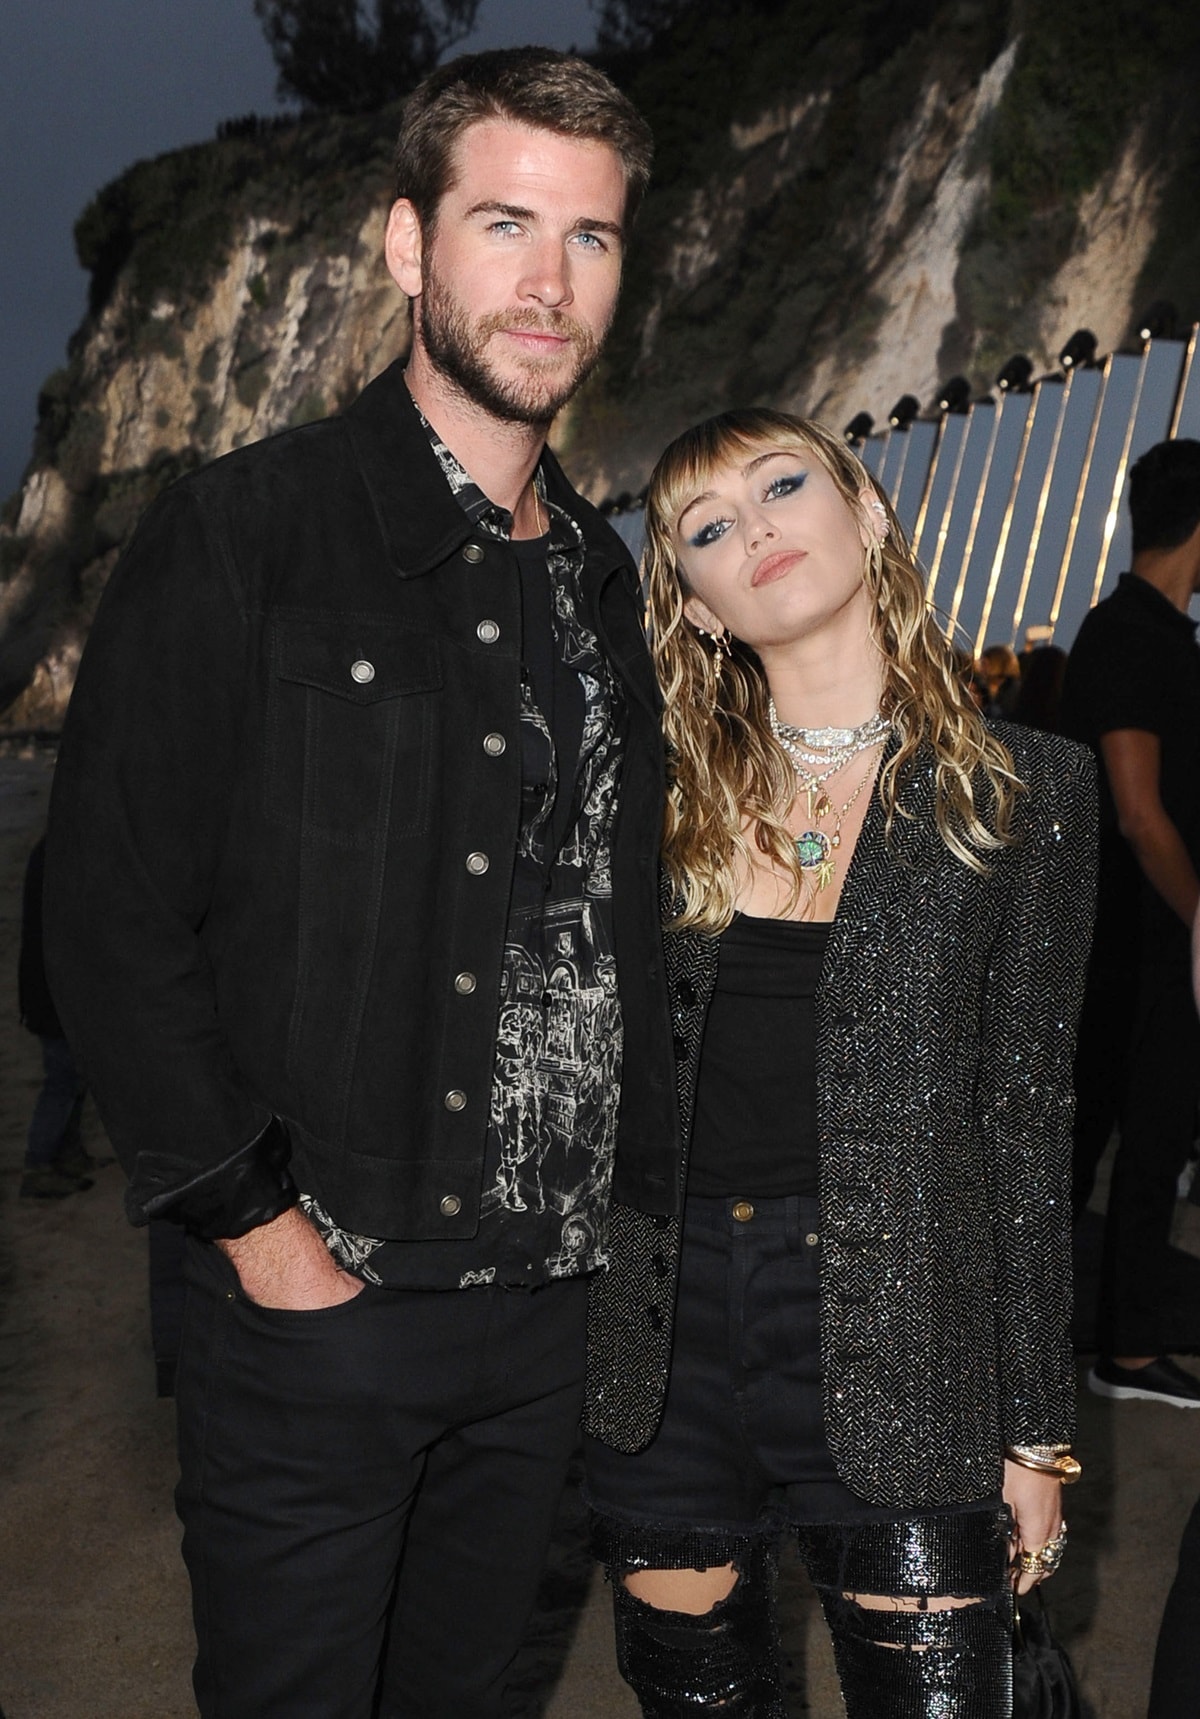 Miley Cyrus and Liam Hemsworth had an on-again, off-again relationship that started in 2009, got engaged twice, married in 2018, and eventually divorced in 2020